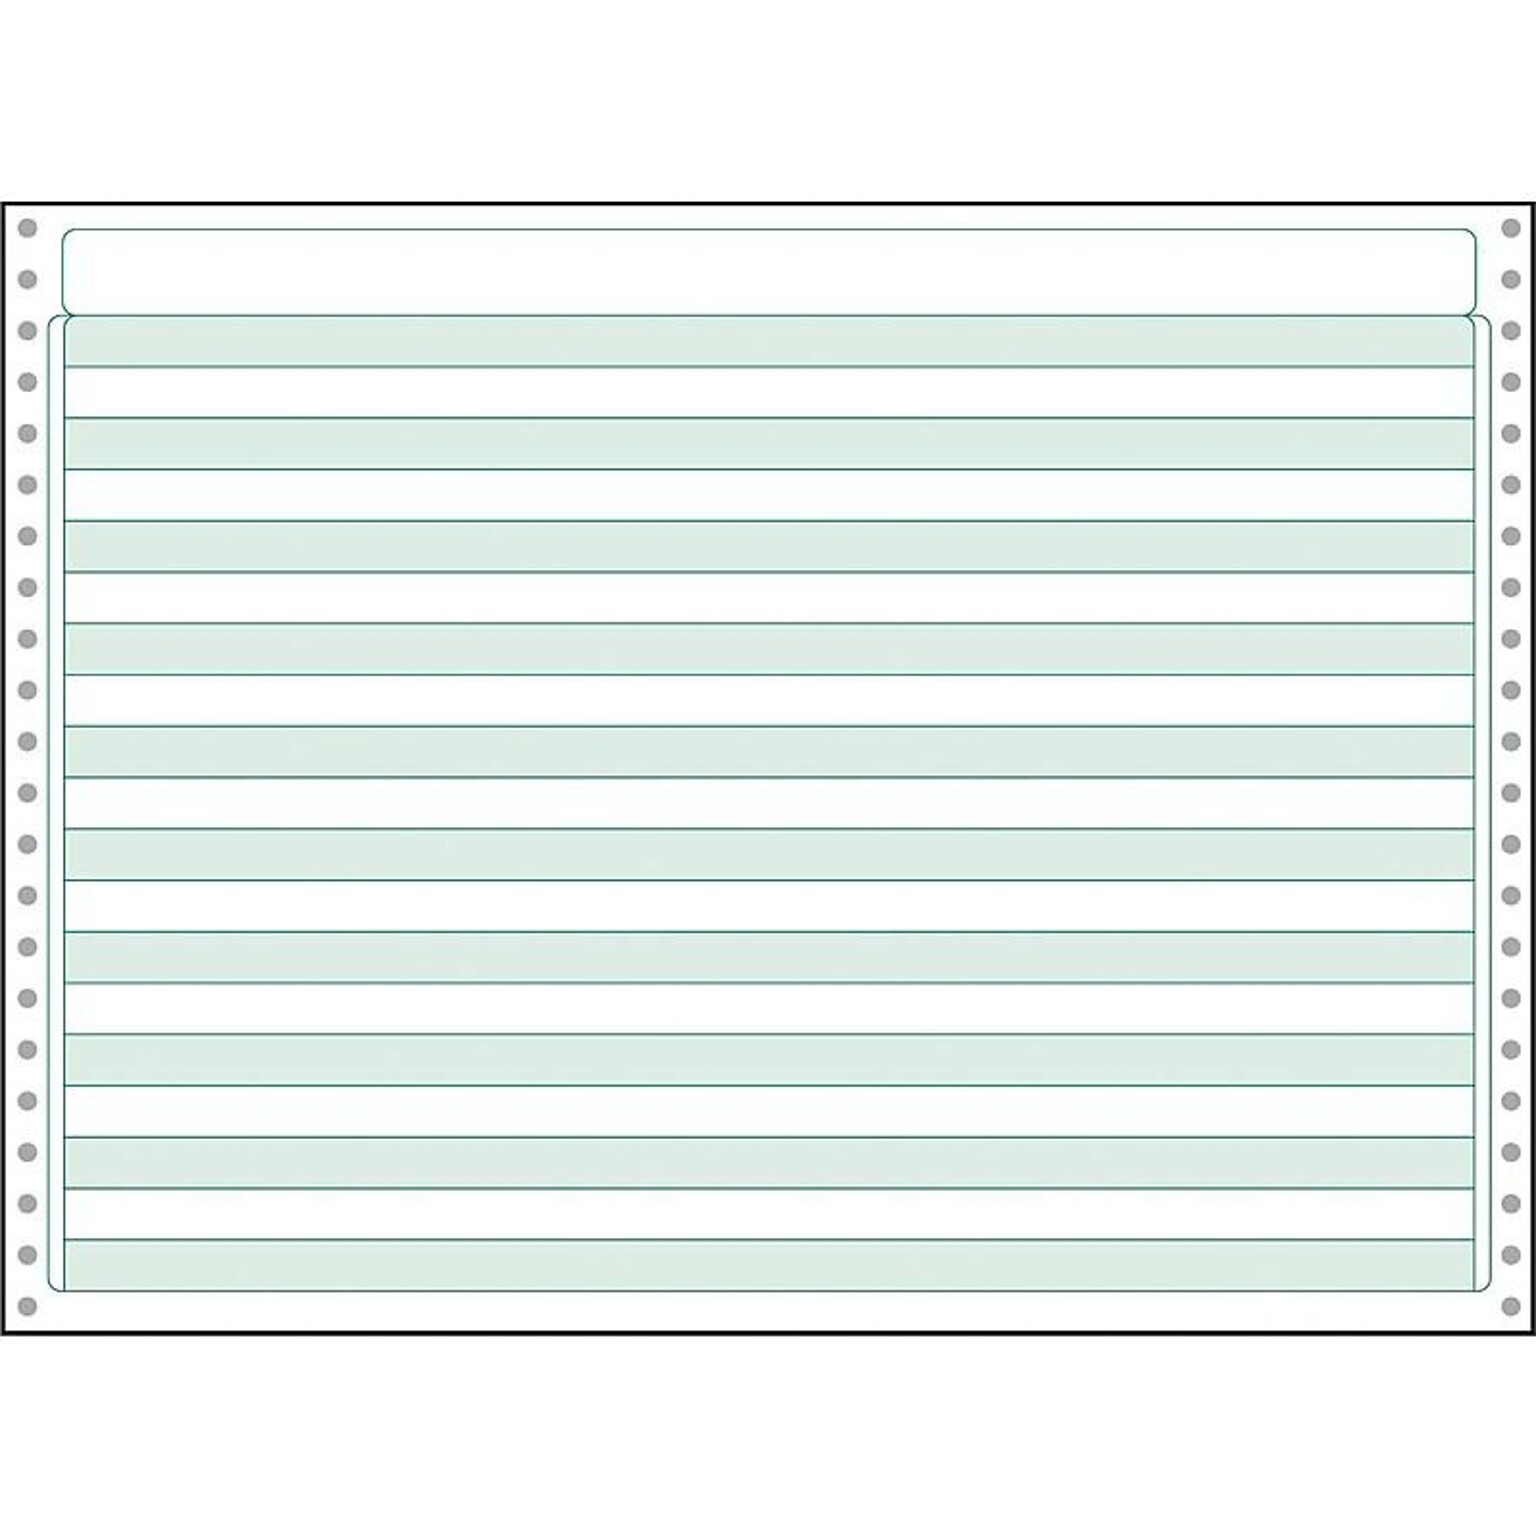 Printworks® Professional Continuous Computer Paper, 20 lbs., 11 x 14.875, Green Bar, 2200 Sheets/Carton (PRB02716)